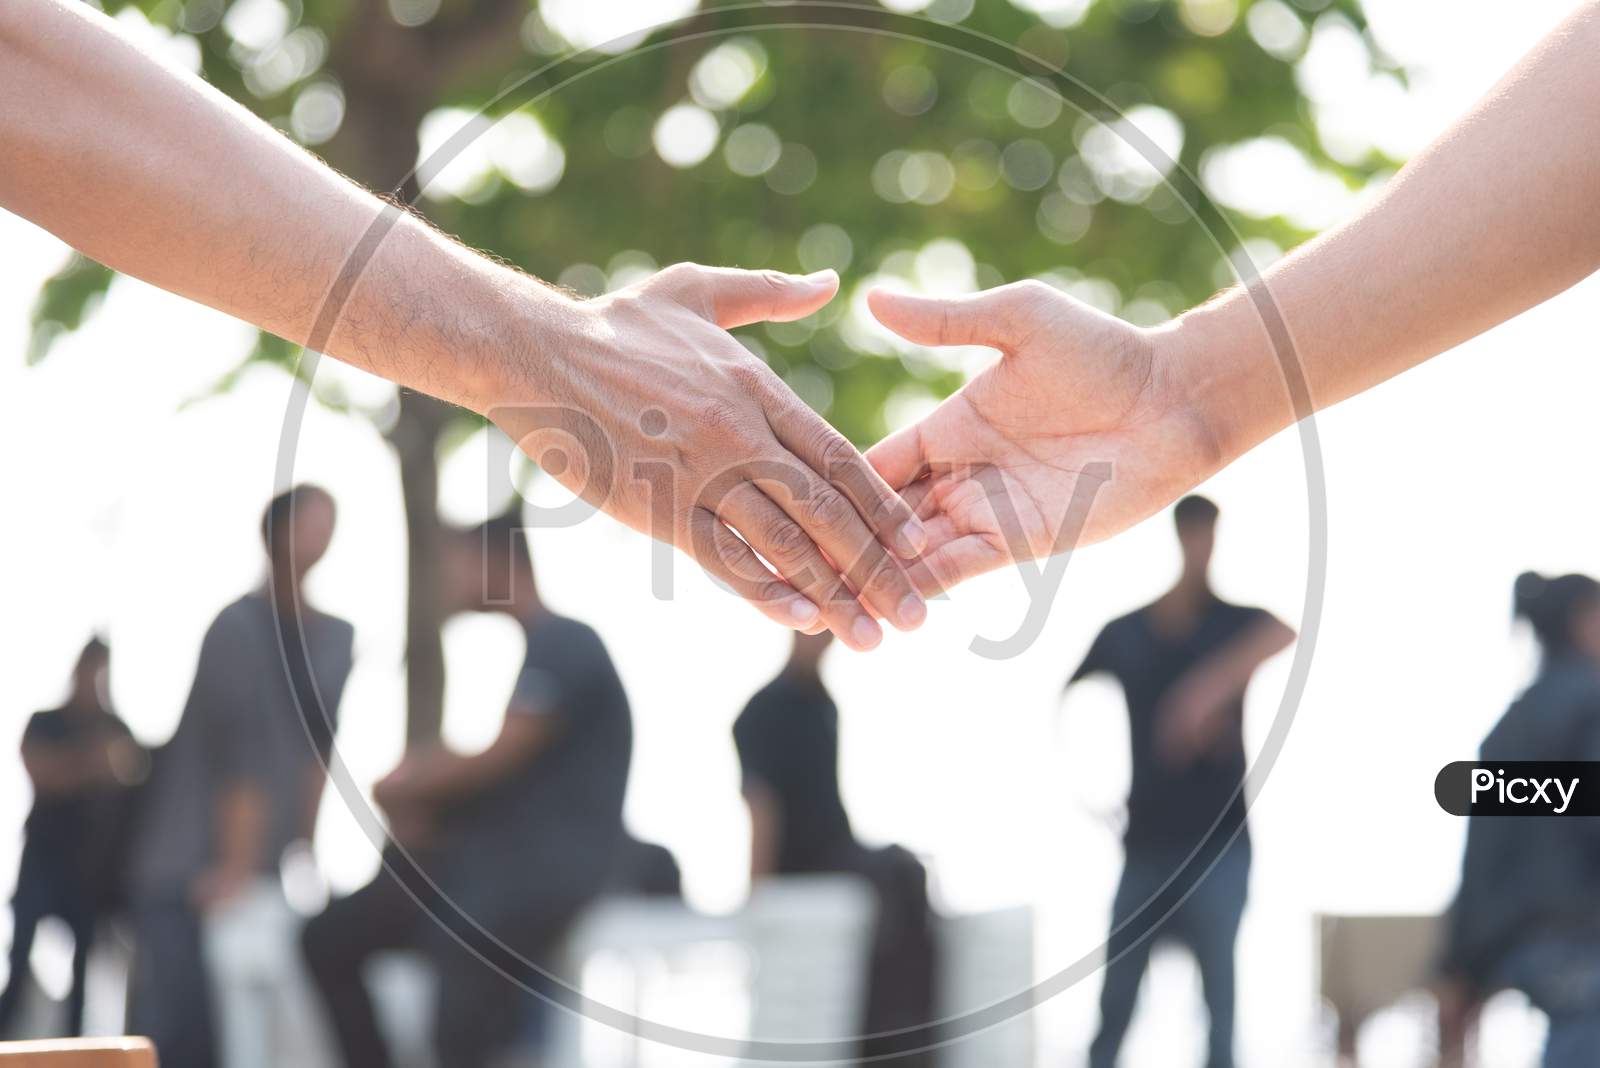 Closed Up Of Hand Shake With People In Background. Business Cooperation And Unity Concept. Business And Outdoors Theme.